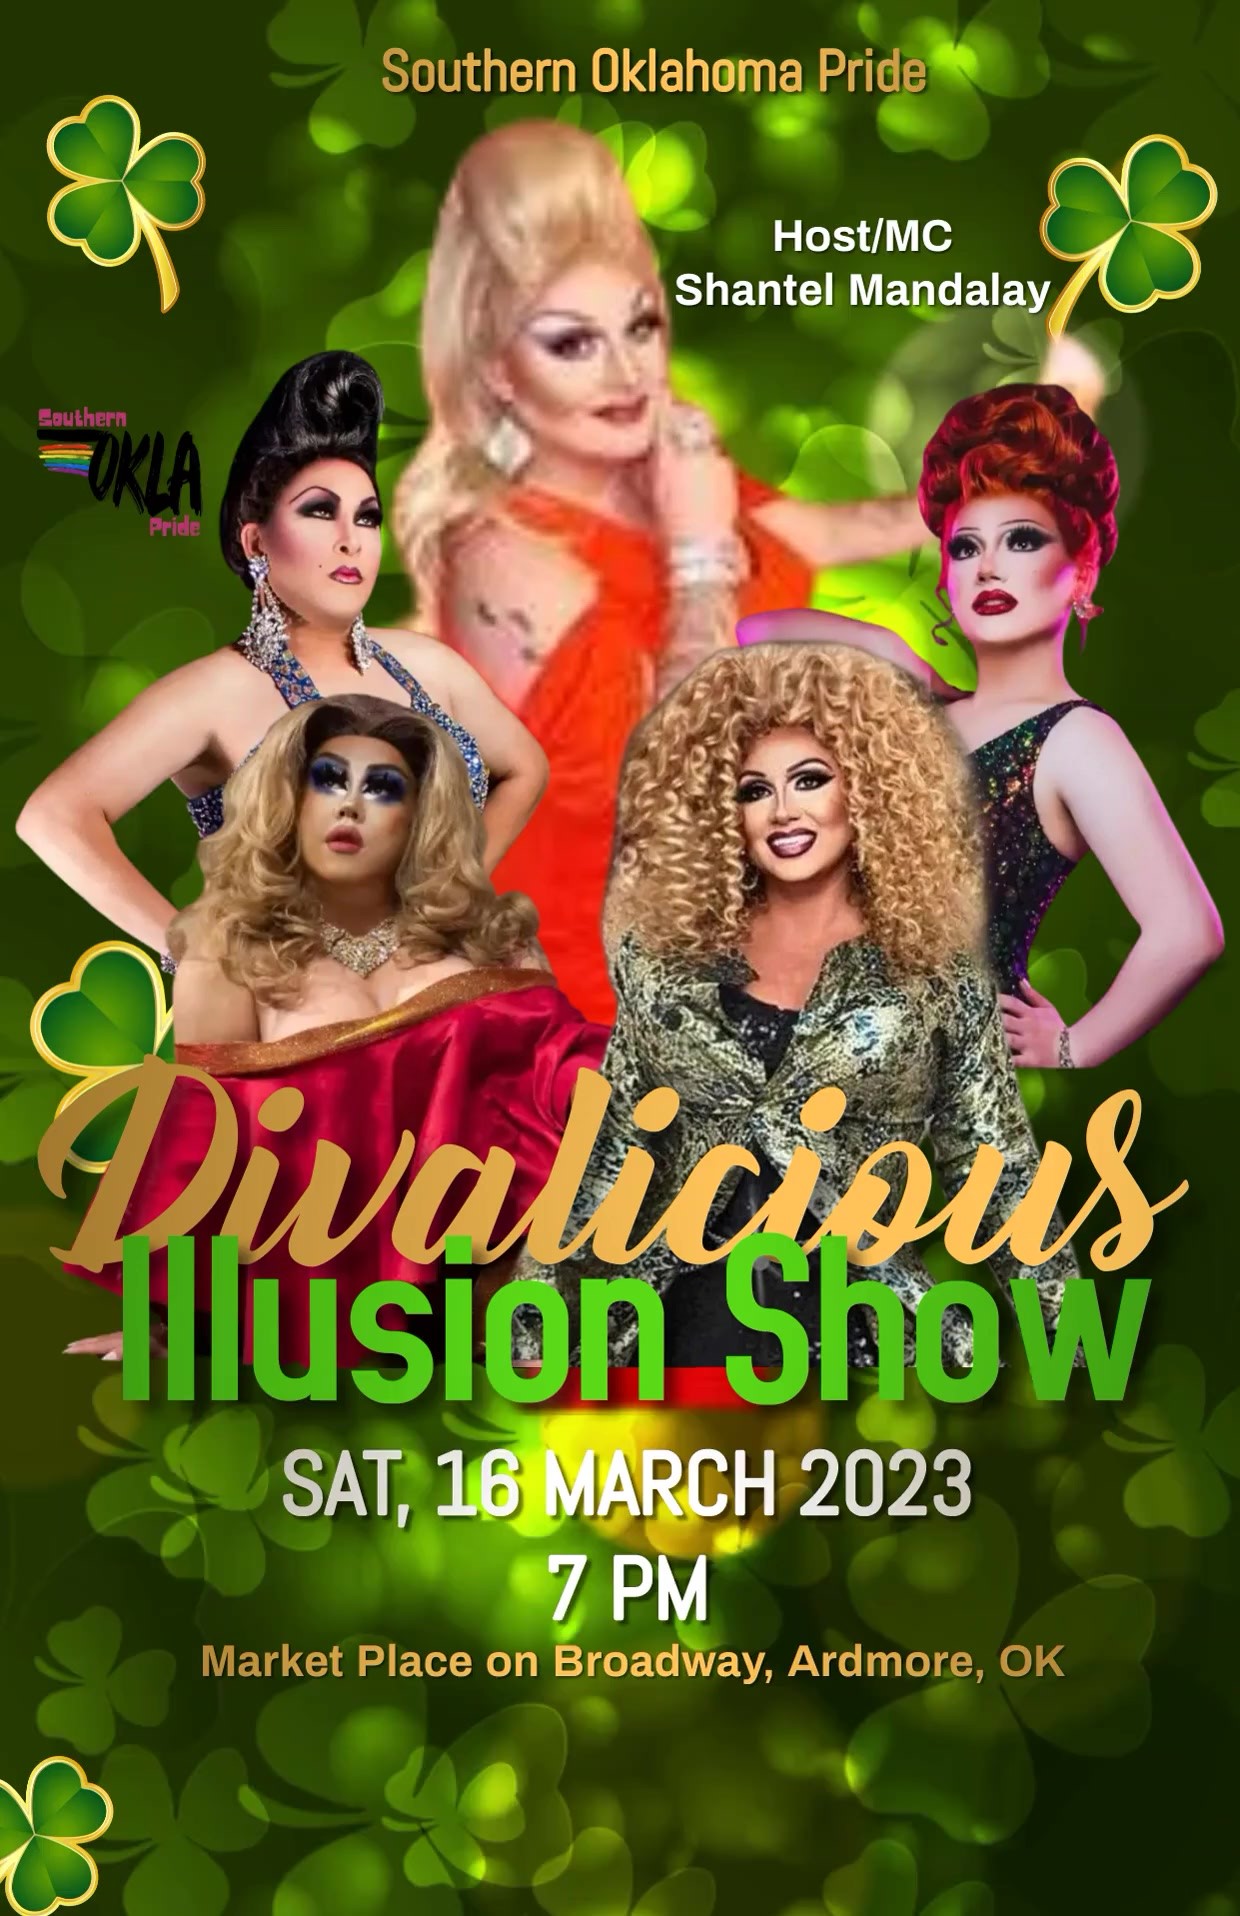 DIVALICIOUS Illusions Show Hosted by Shantel Mandalay on Mar 16, 19:00@Market Place on Broadway - Buy tickets and Get information on Southern Oklahoma Pride Event, 